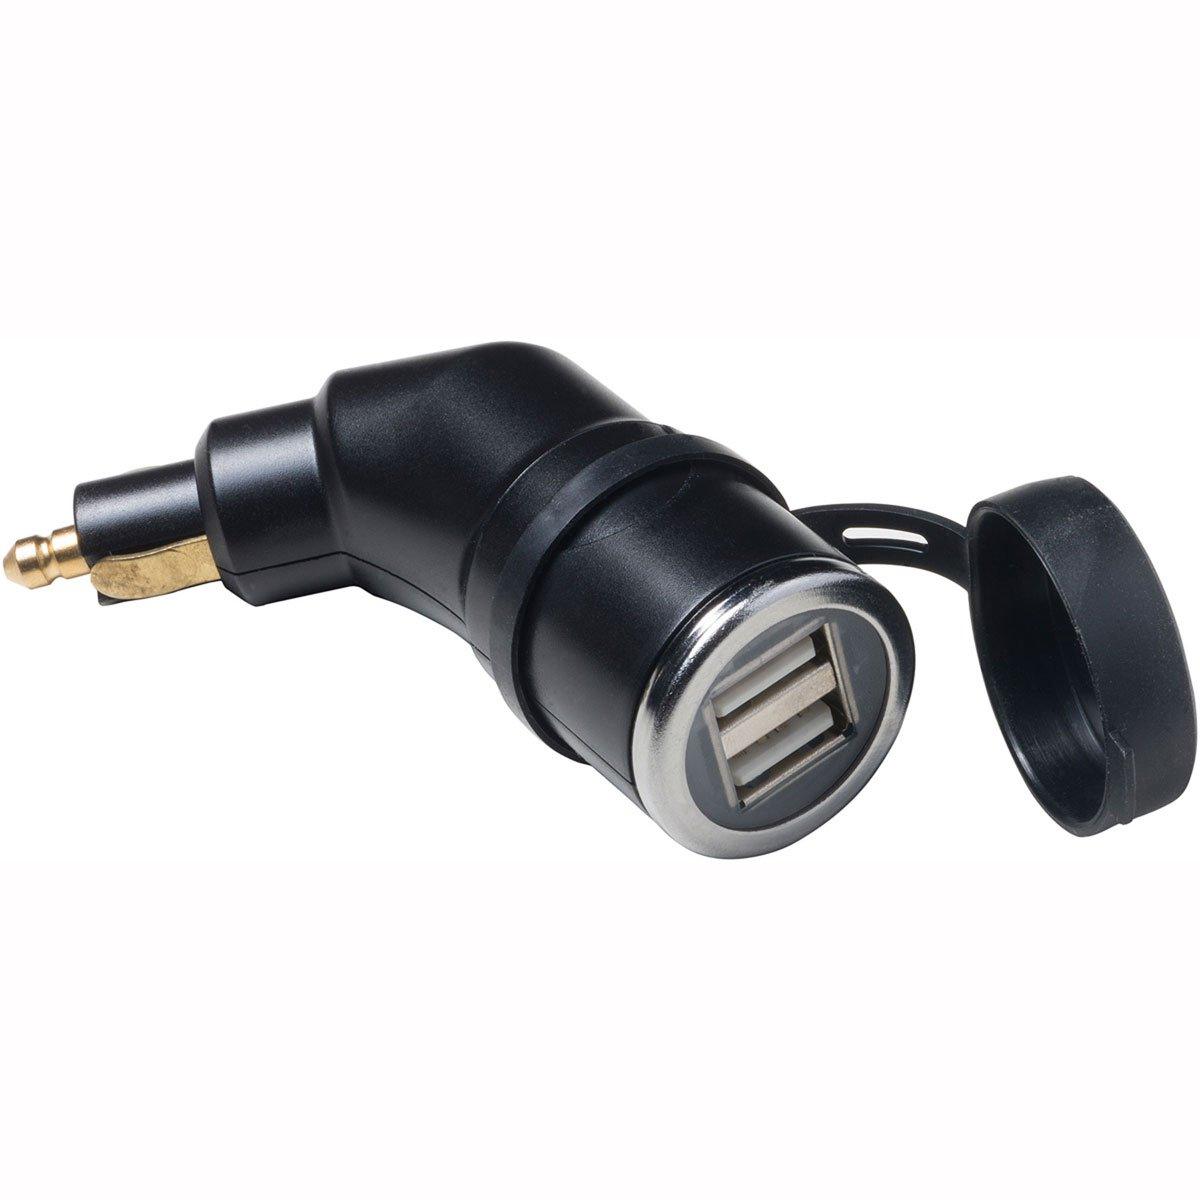 Interphone 12V 2 USB Moto Adaptor DIN - Browse our range of Accessories: Headsets - getgearedshop 